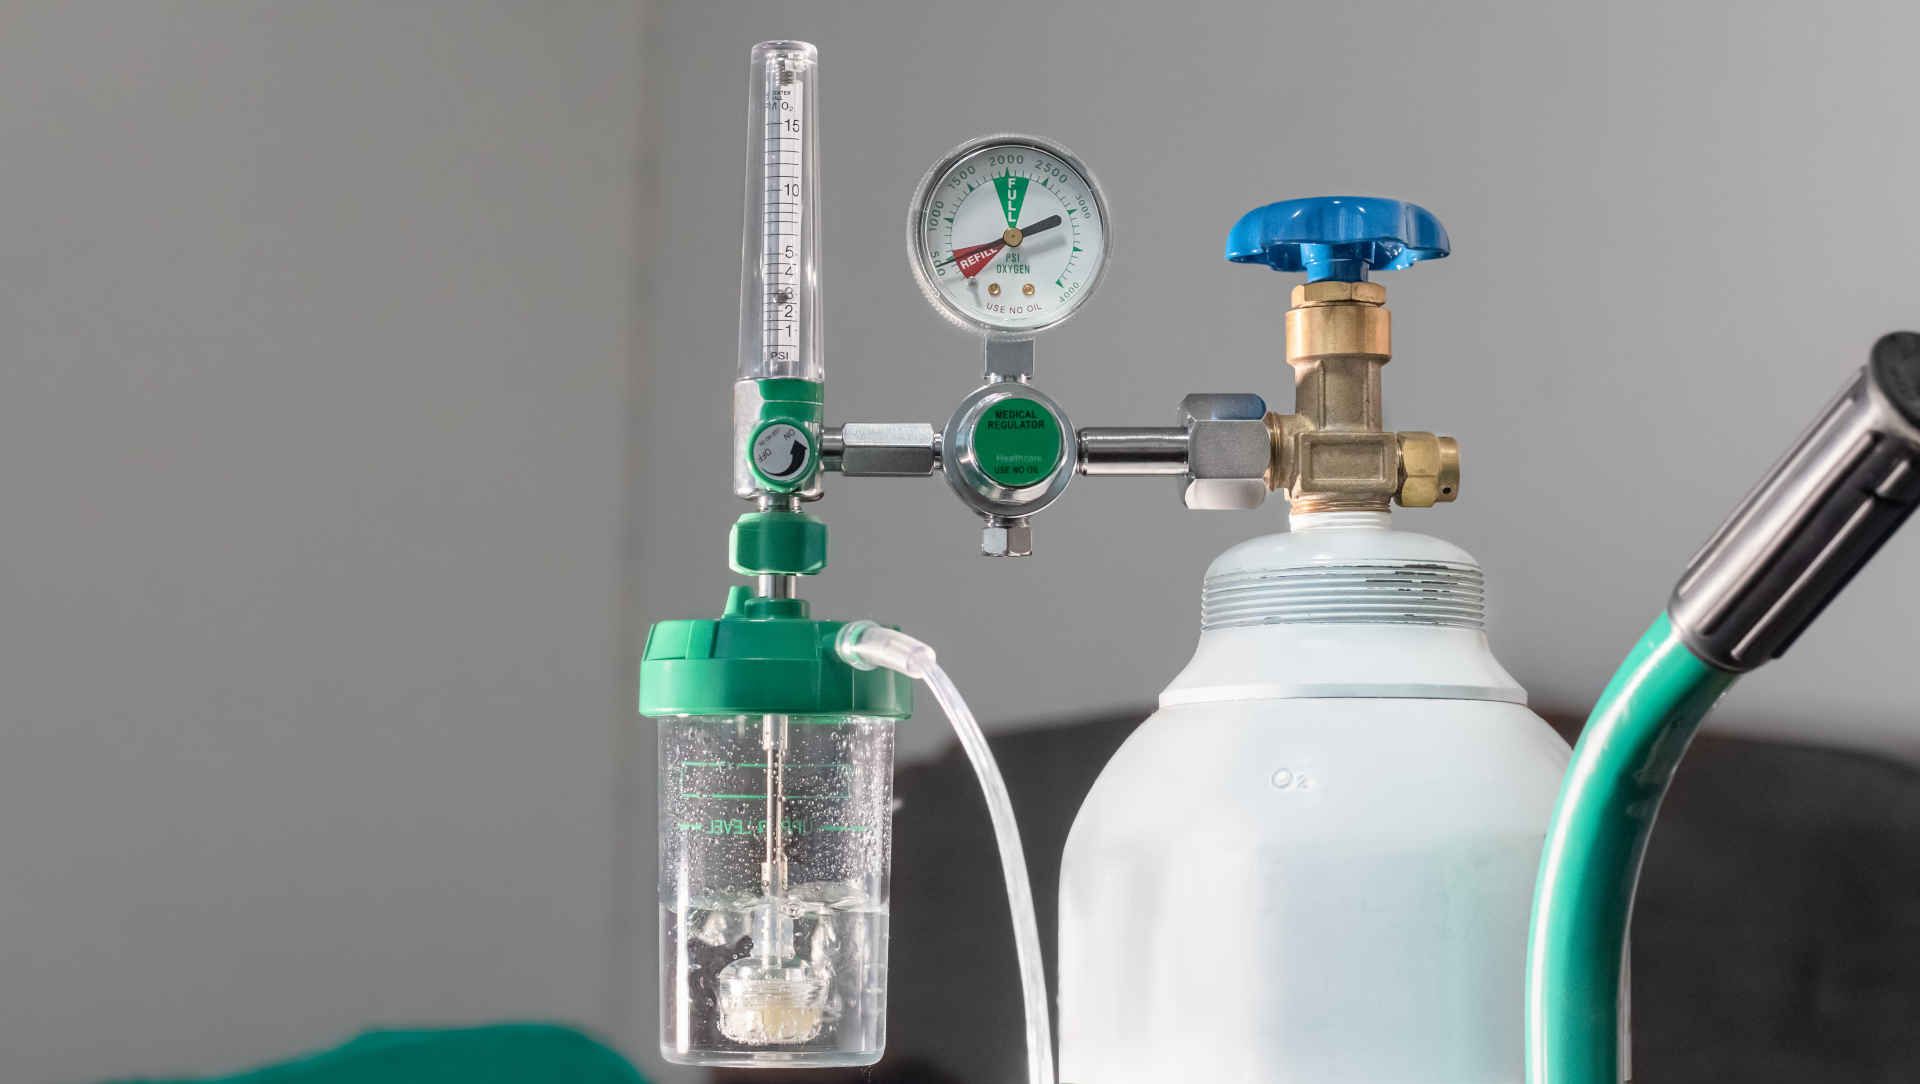 Oxygen cylinder with humidification device and flow meter